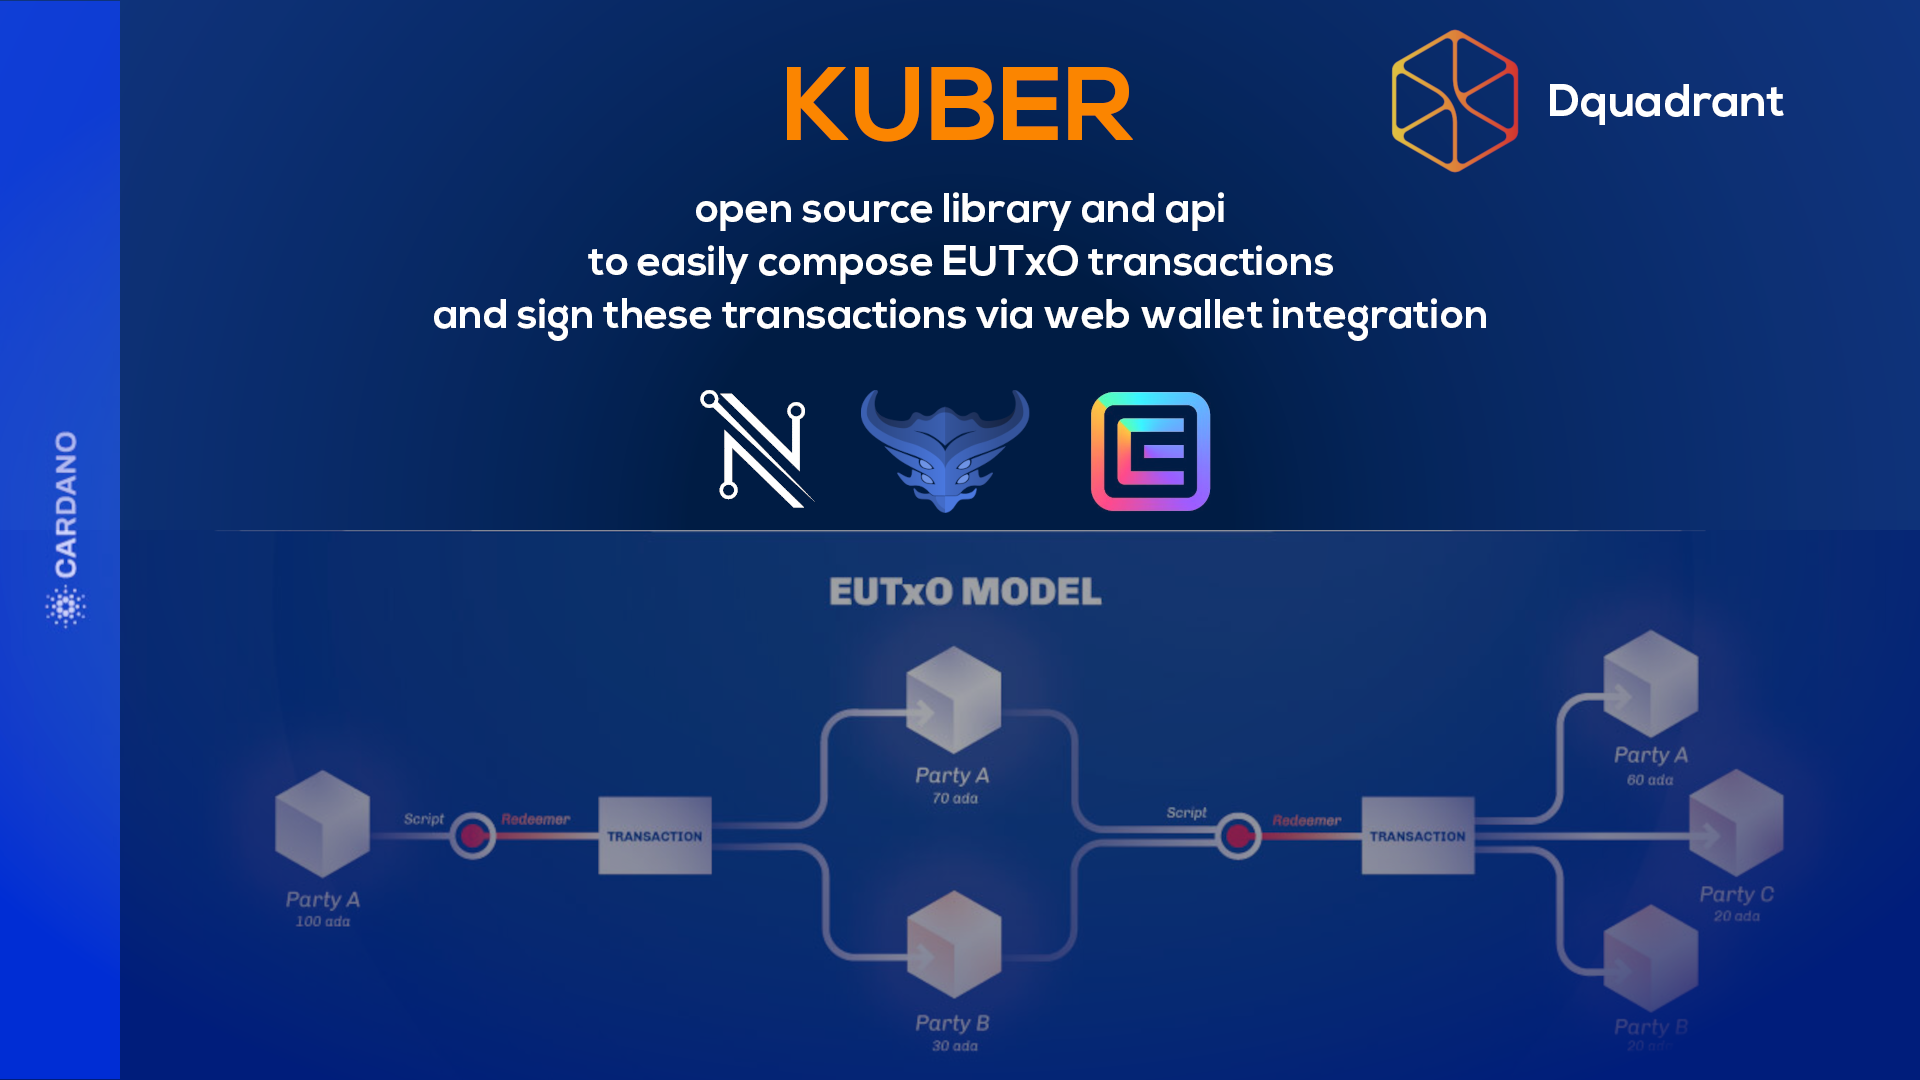 Kuber open source library and api for Cardano